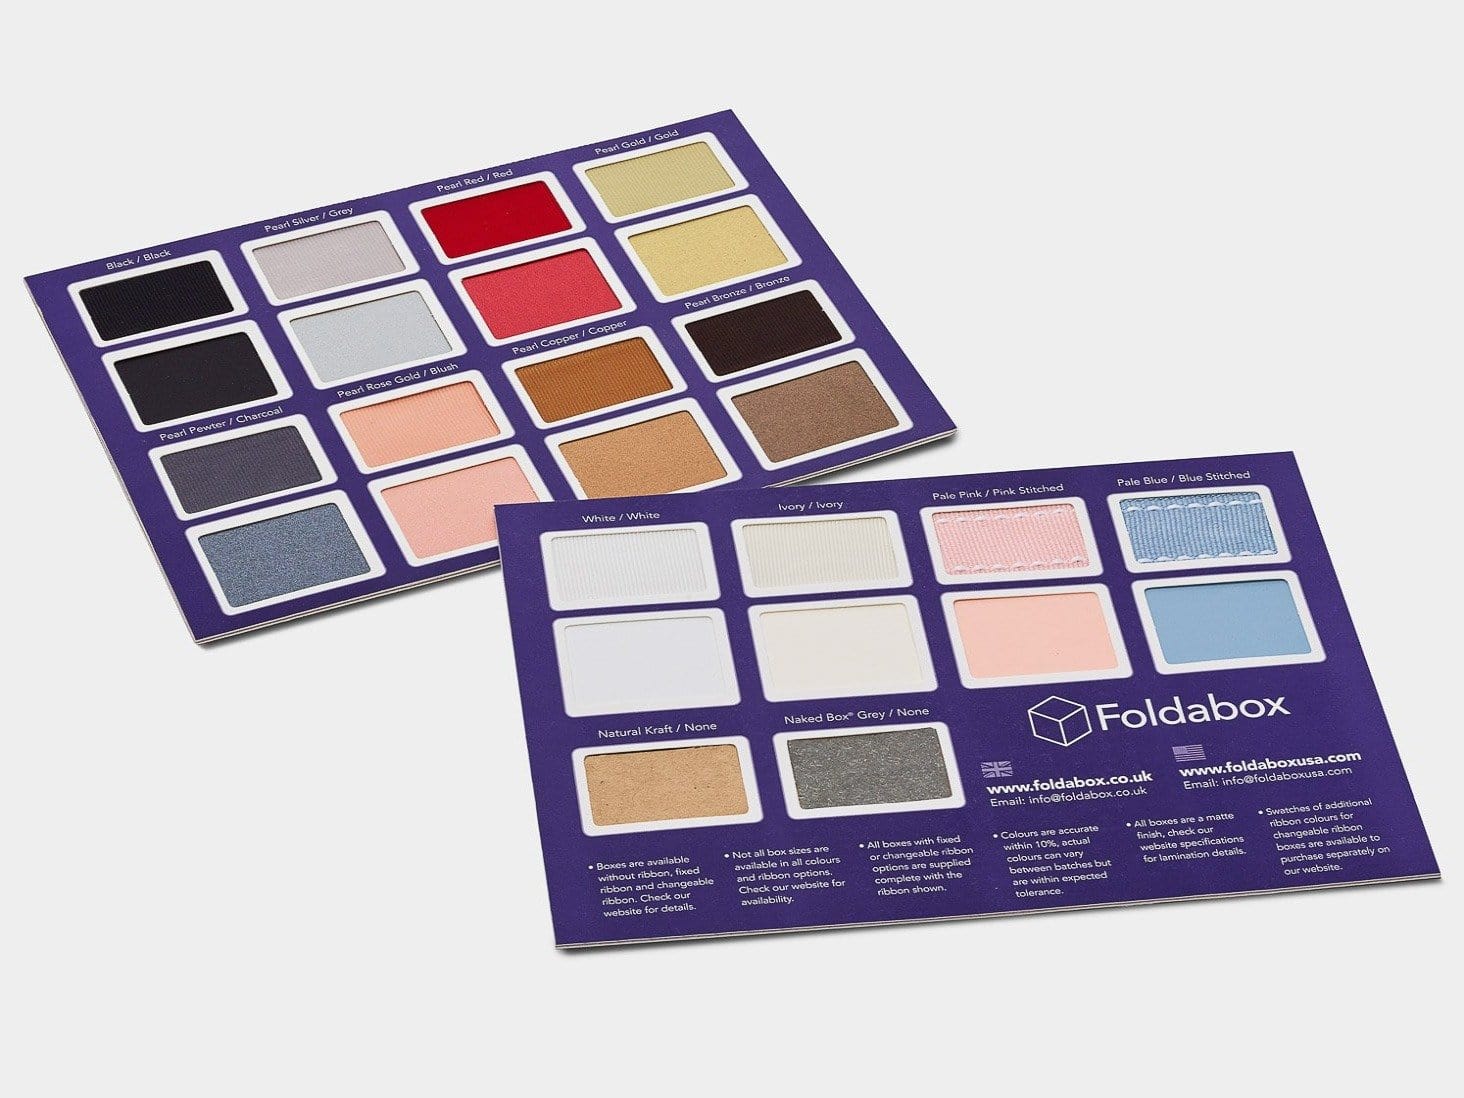 Foldabox Swatch Card showing gift box colours